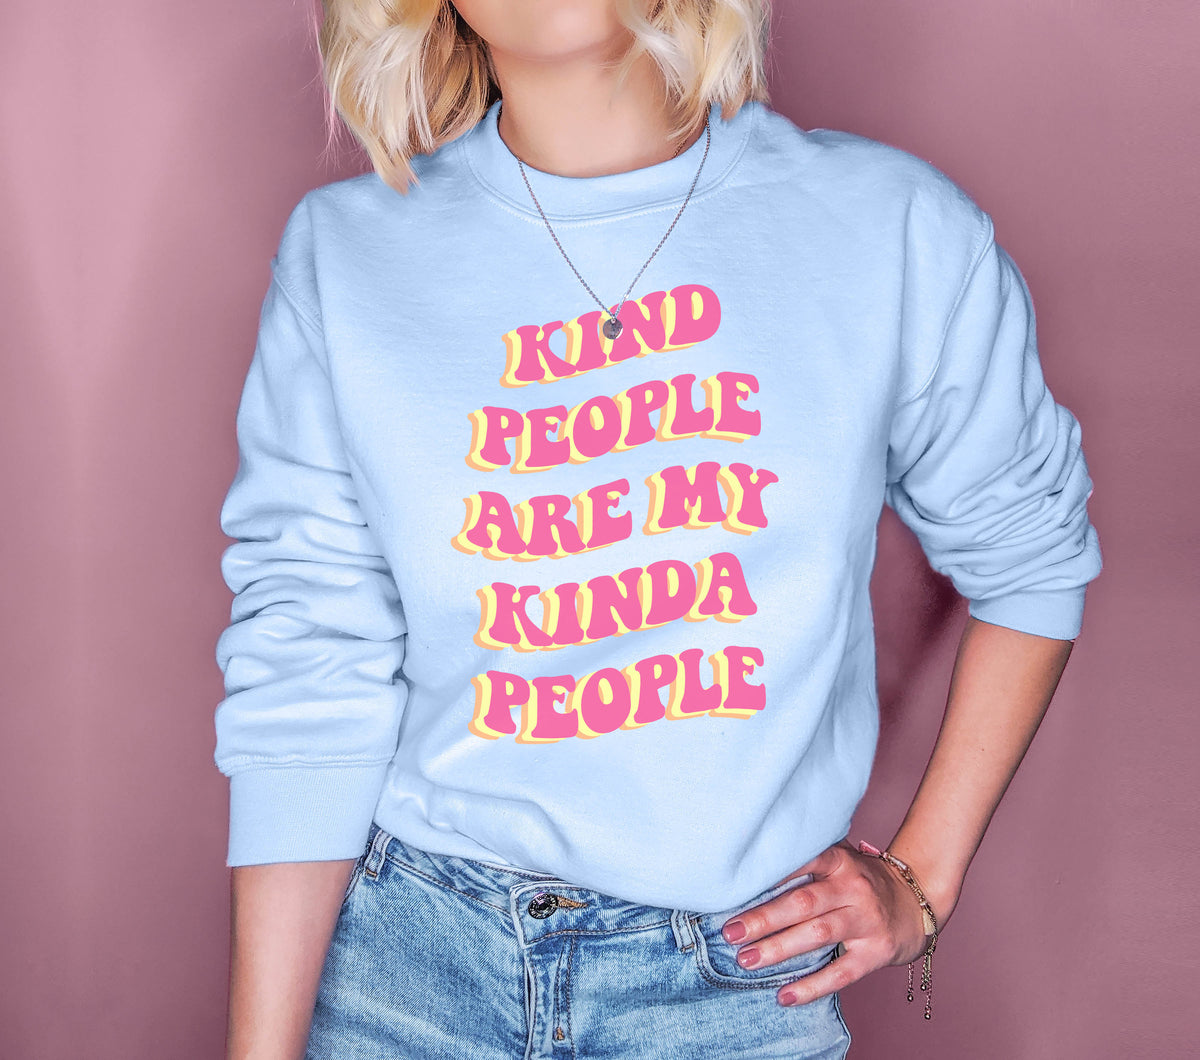 Light blue sweatshirt with a retro font that says kind people are my kinda people - HighCiti